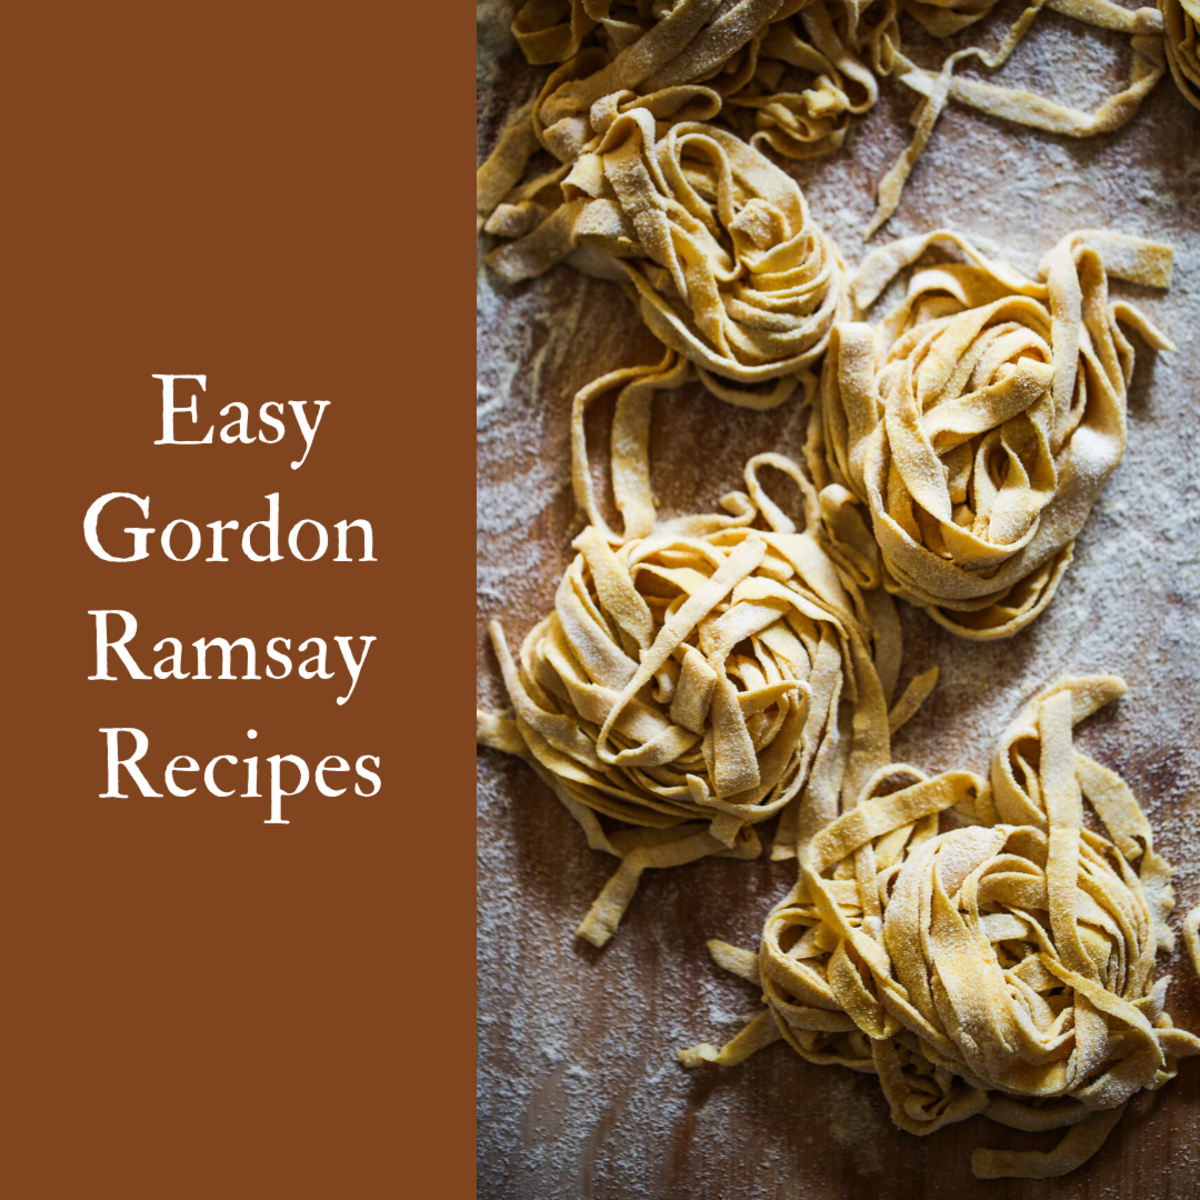 Gordon Ramsay Recipes That Are Easy to